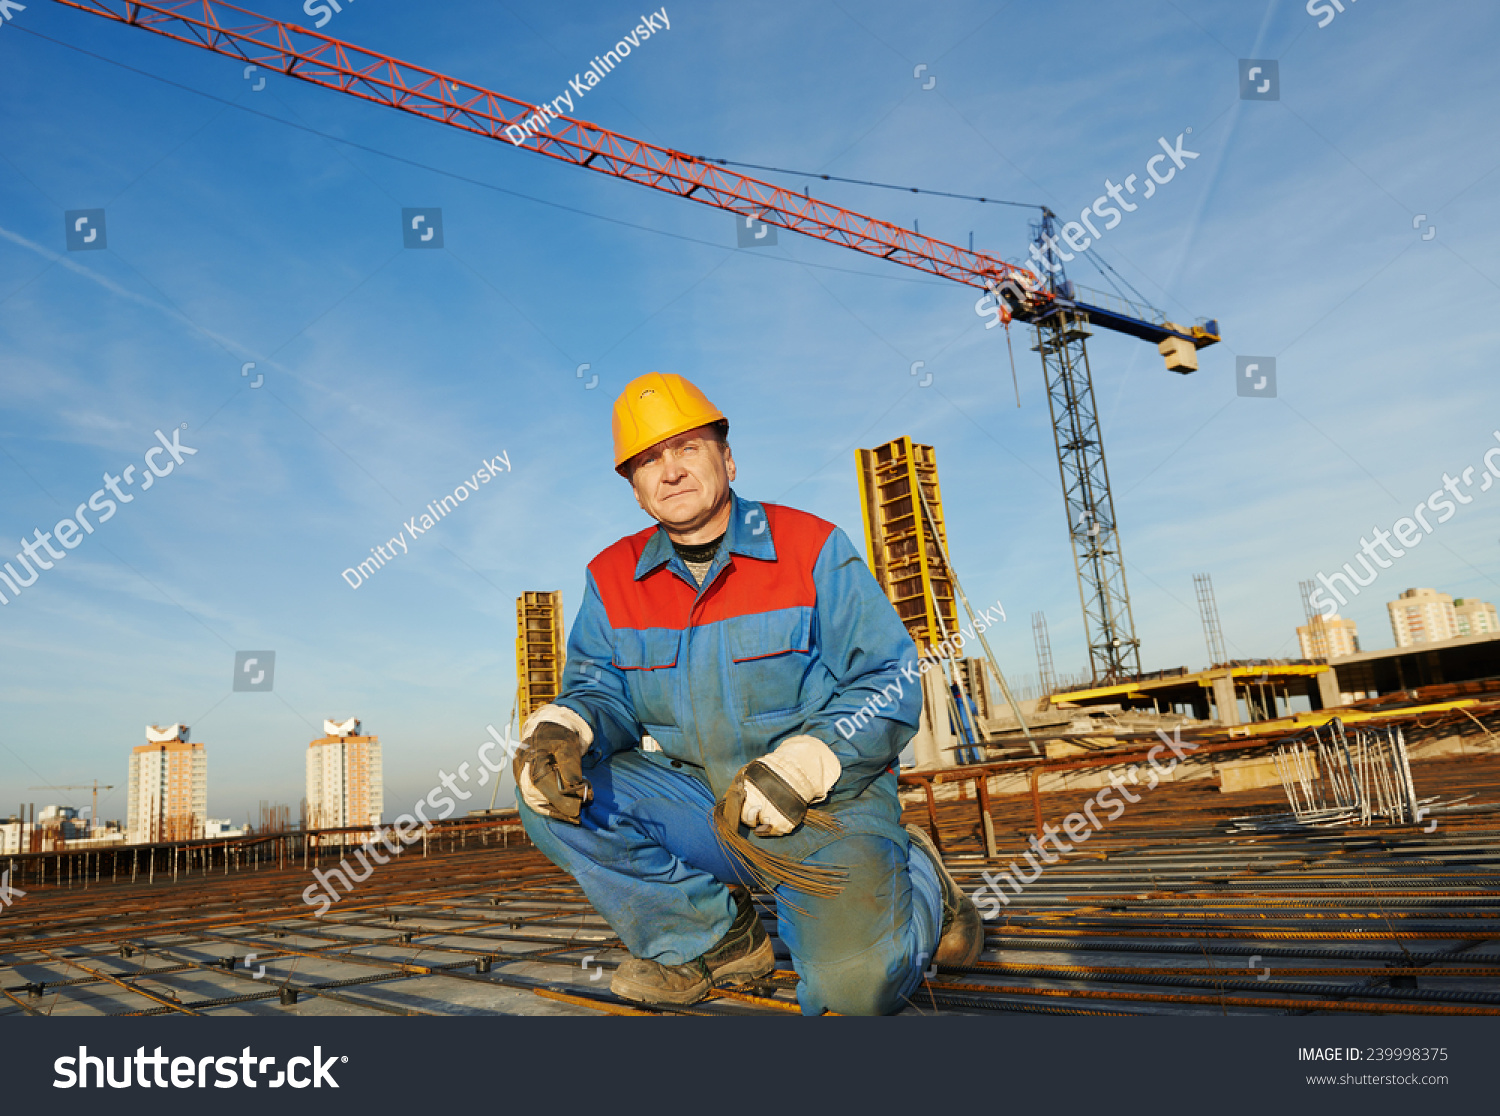 builder worker knitting metal rebars into framework reinforcement for concrete pouring at construction site #239998375